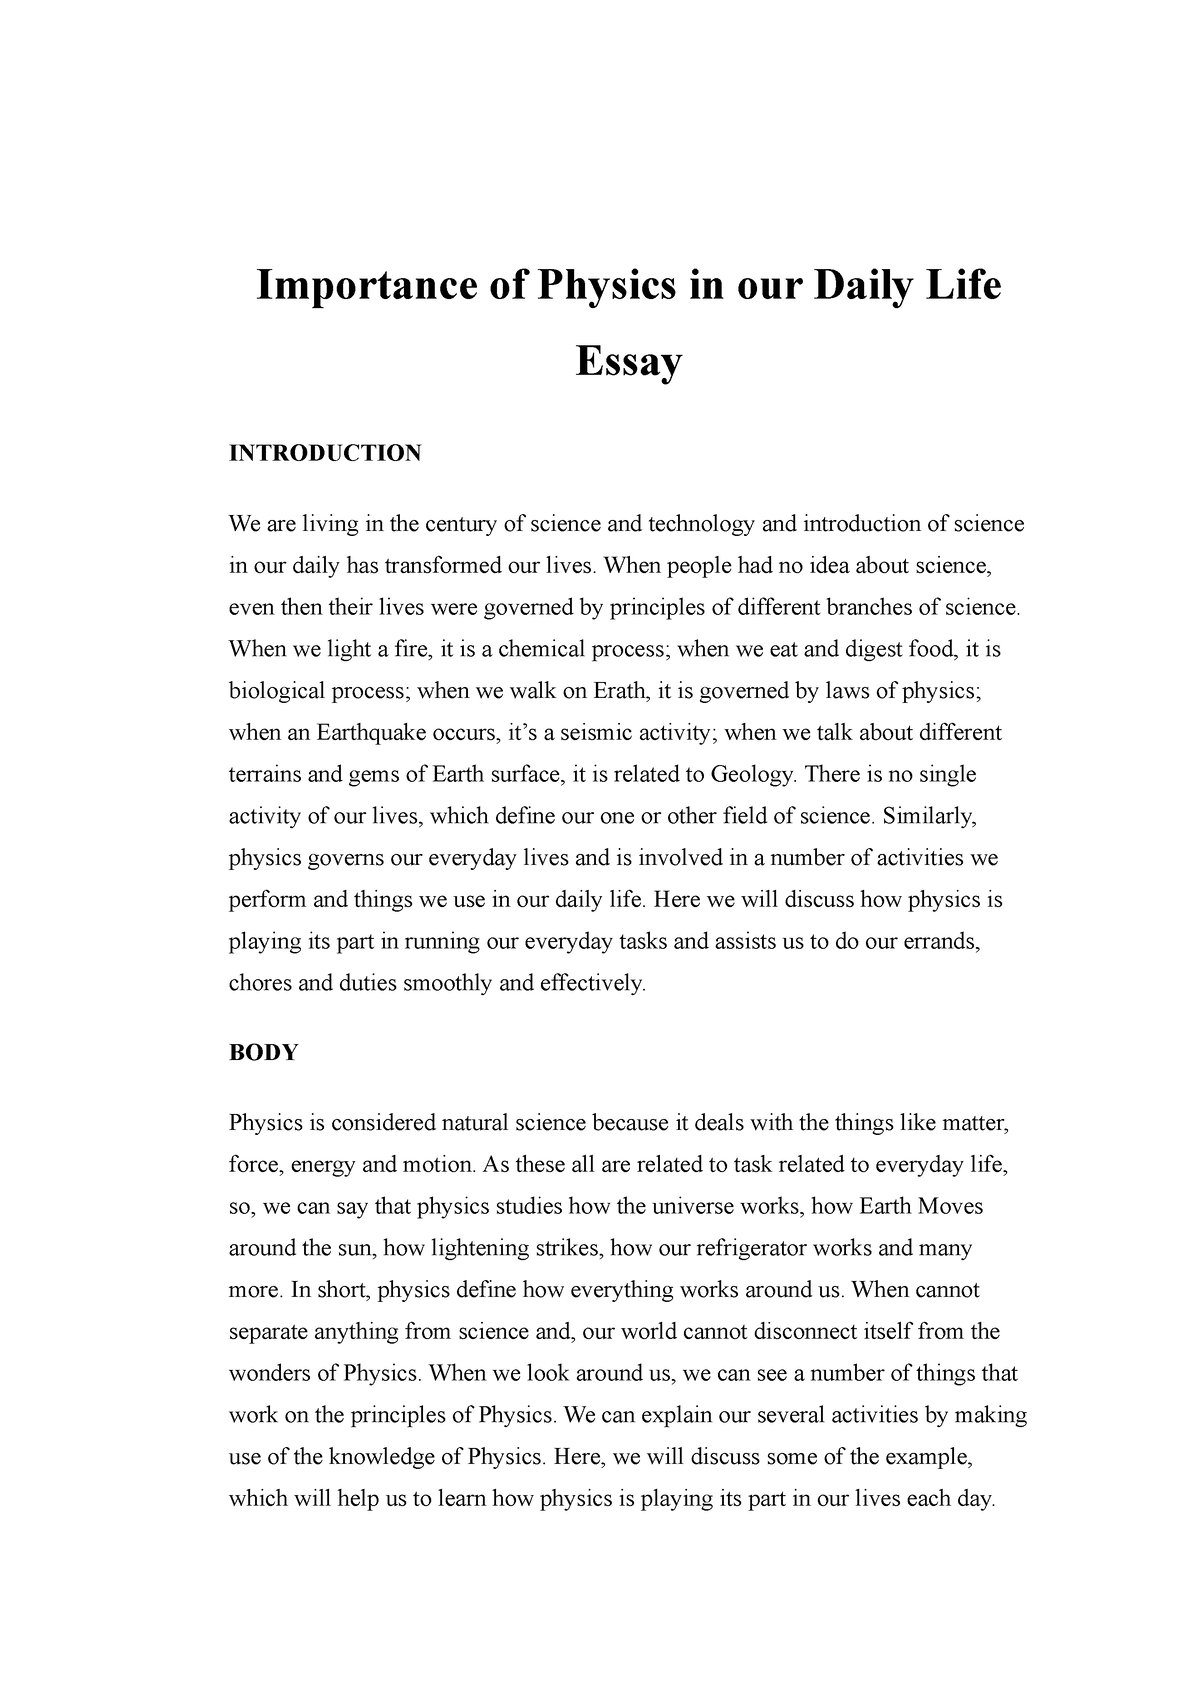 physics in our daily life essay